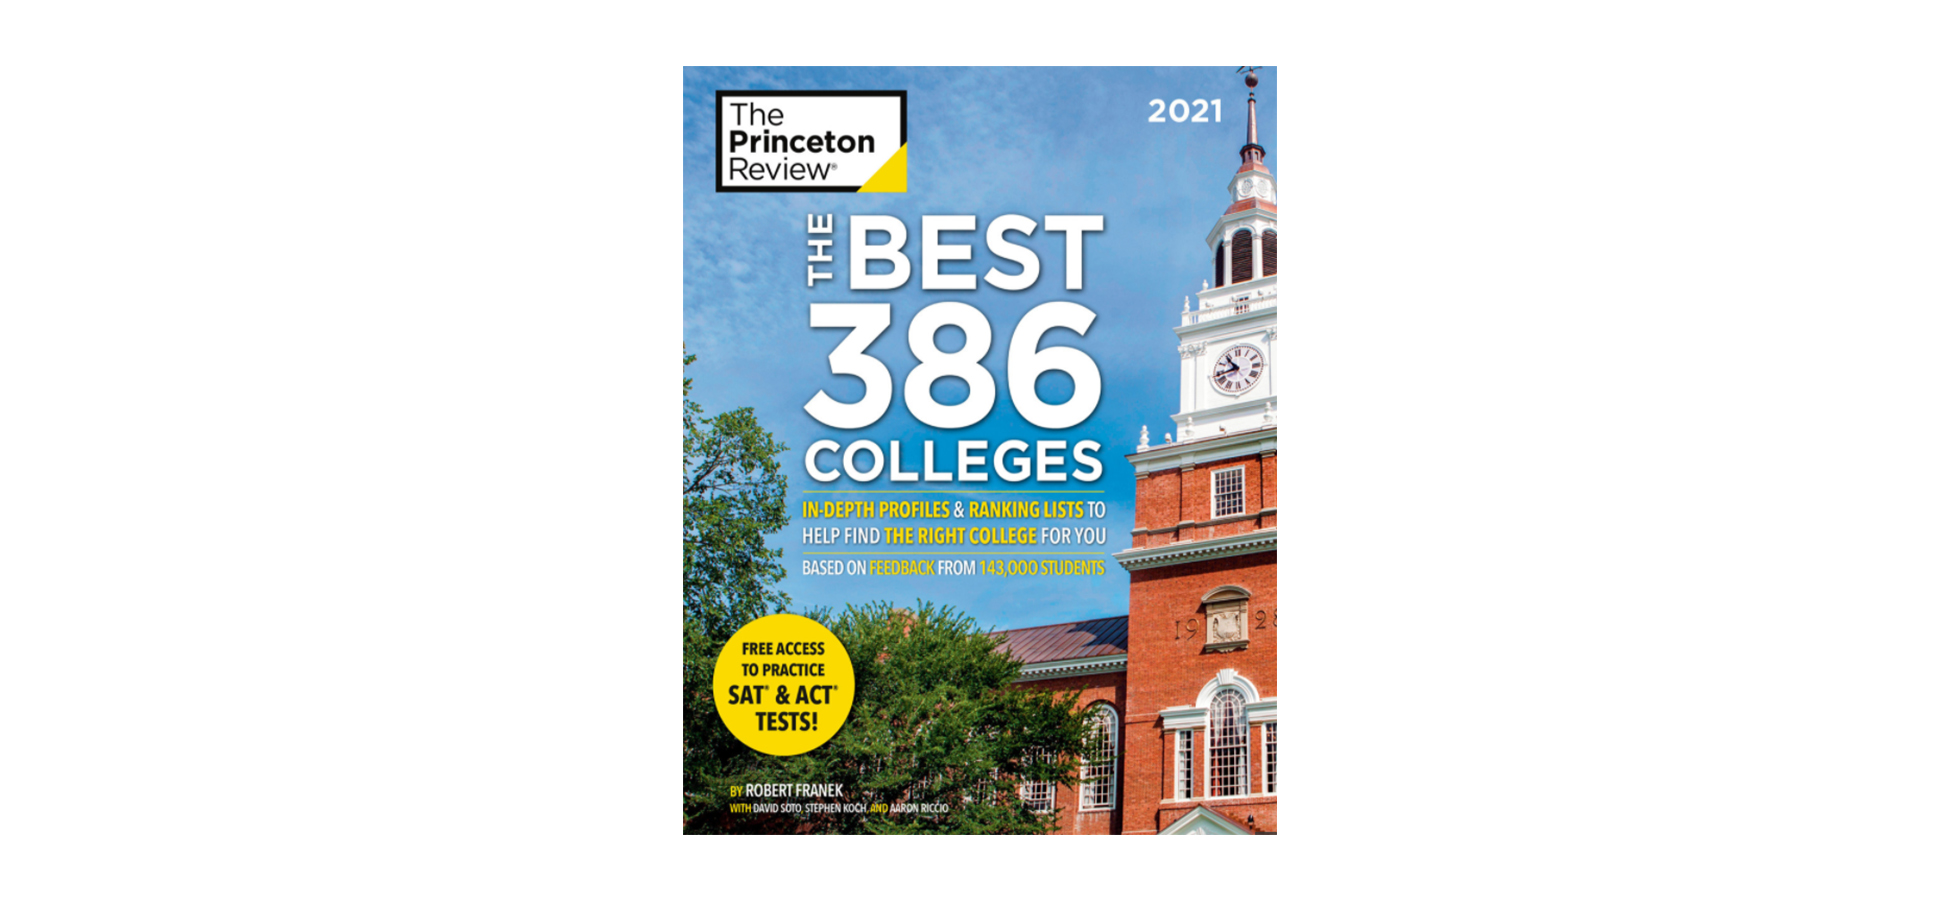 Assumption One of The Princeton Review’s “Best 386 Colleges” for 2021